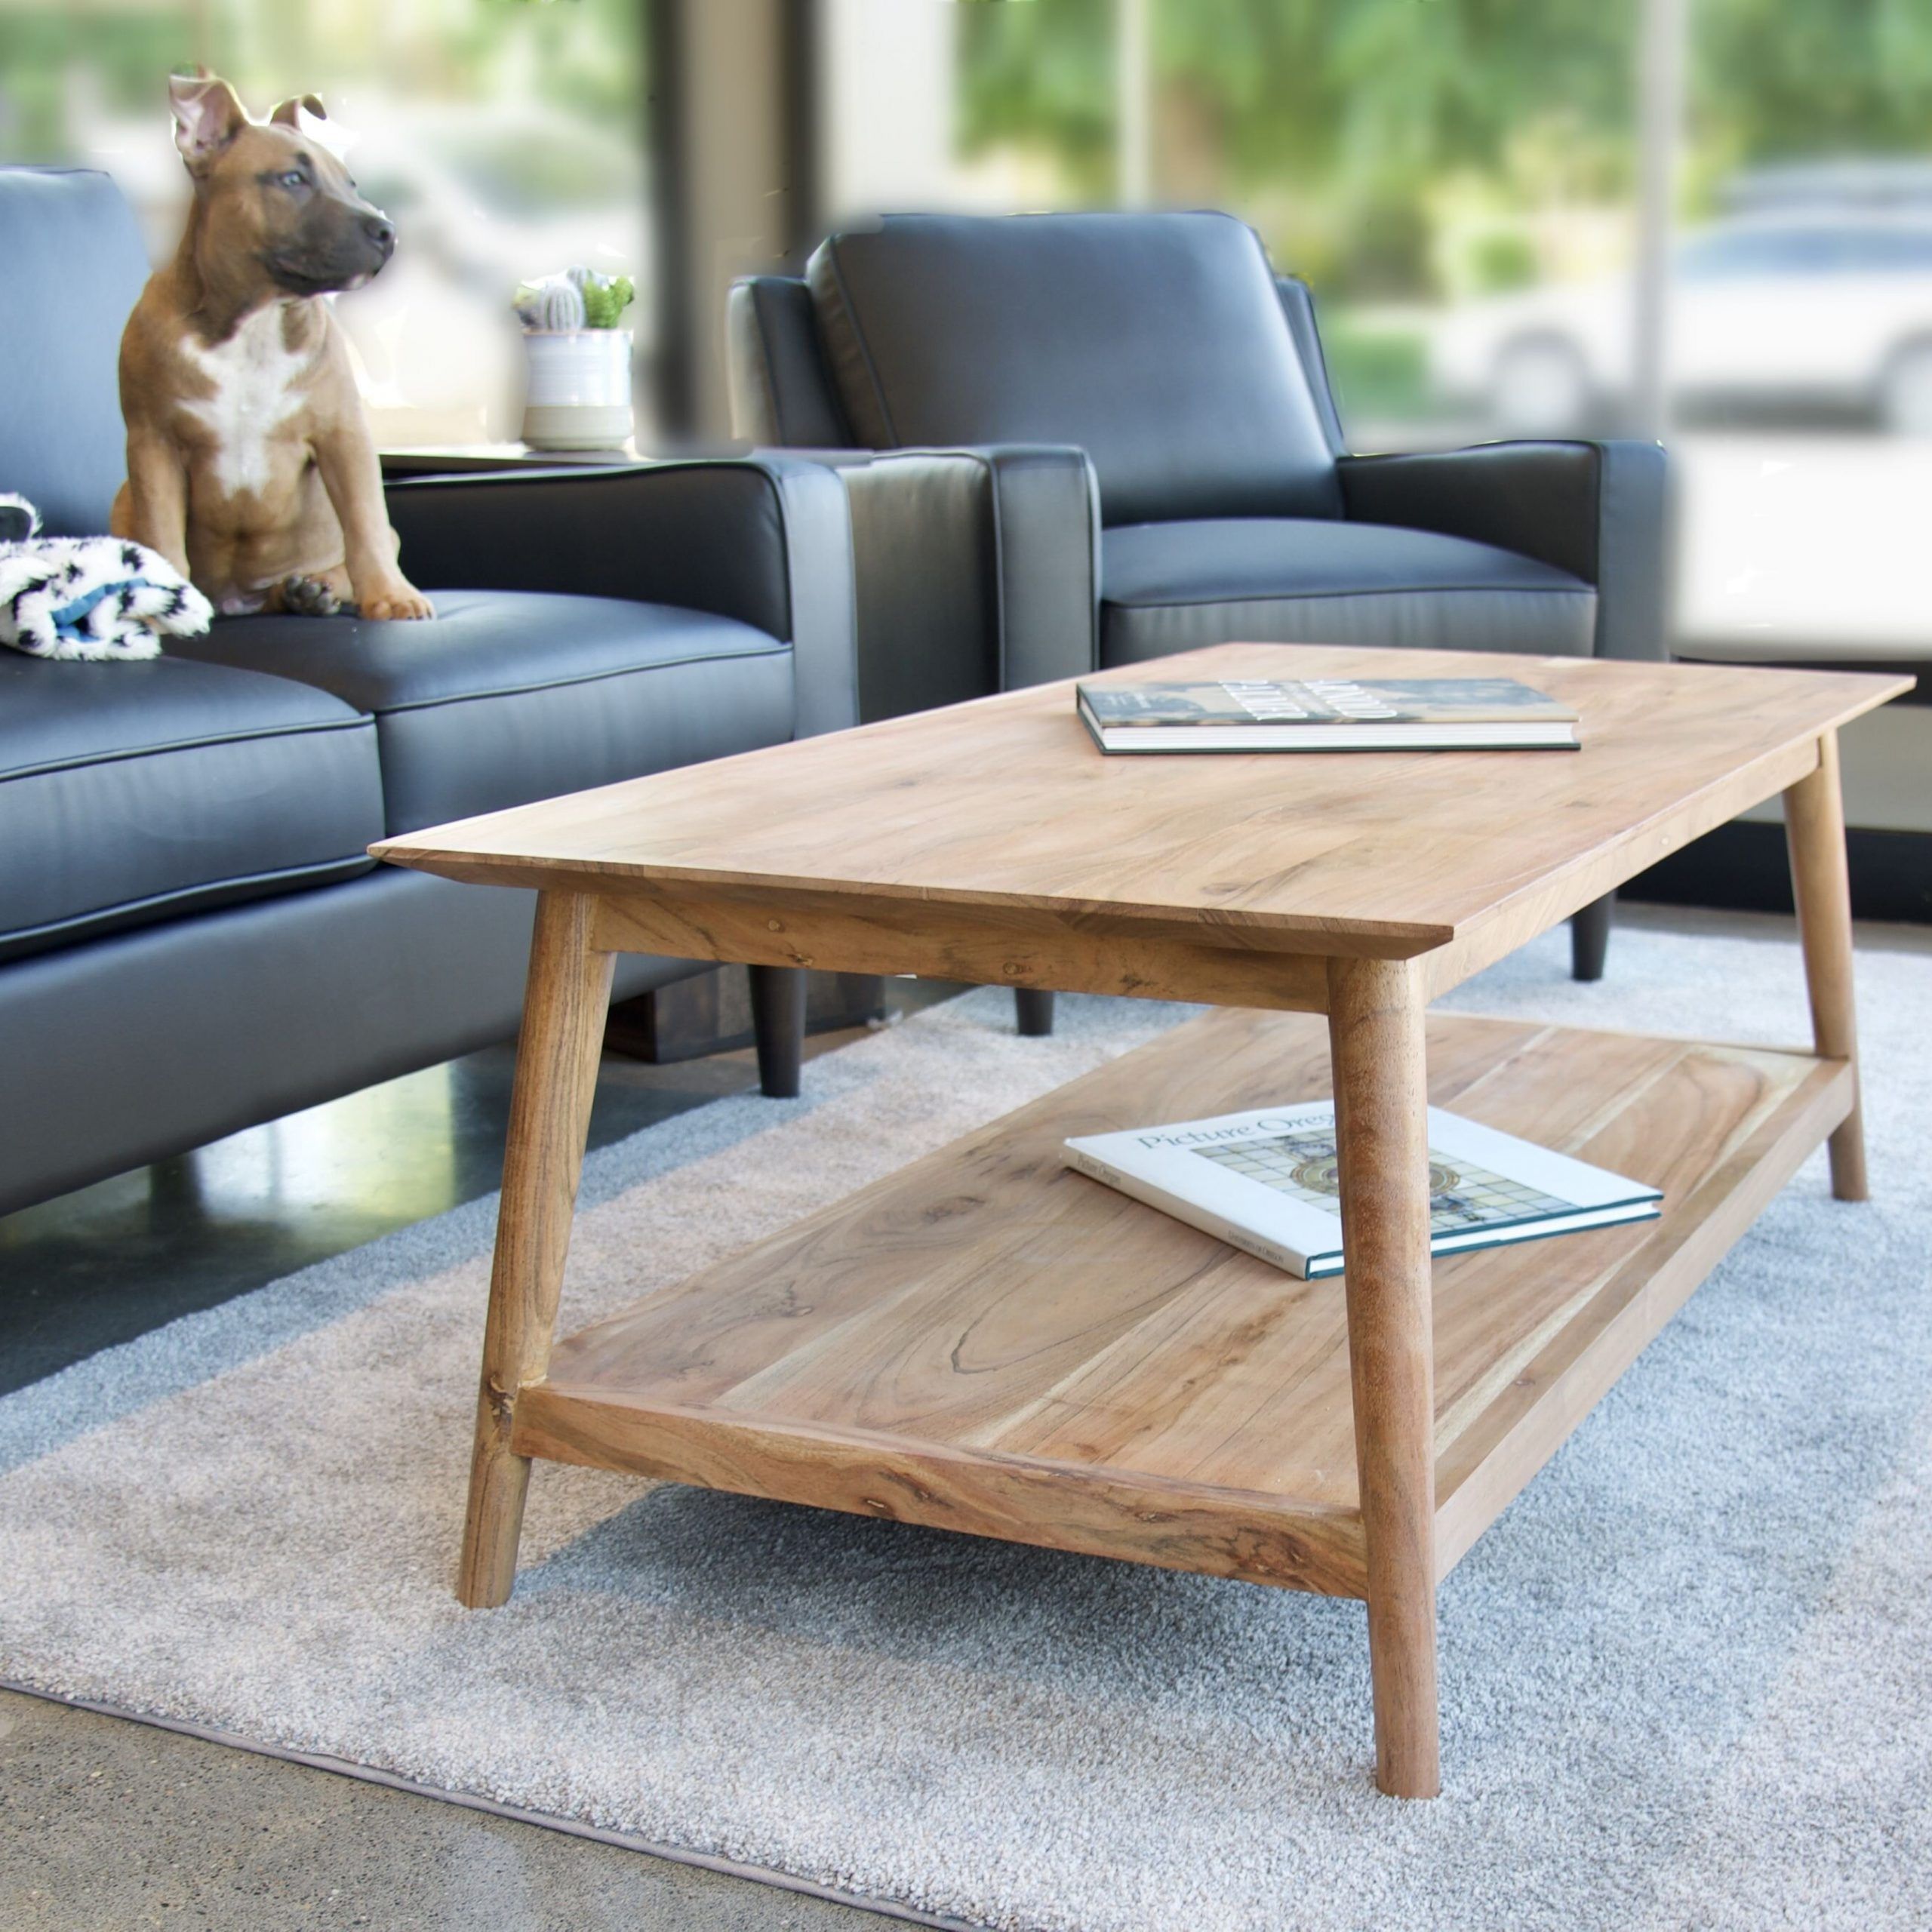 Union Rustic Altamease Solid Acacia Coffee Table | Wayfair Inside Solid Acacia Wood Coffee Tables (View 7 of 15)